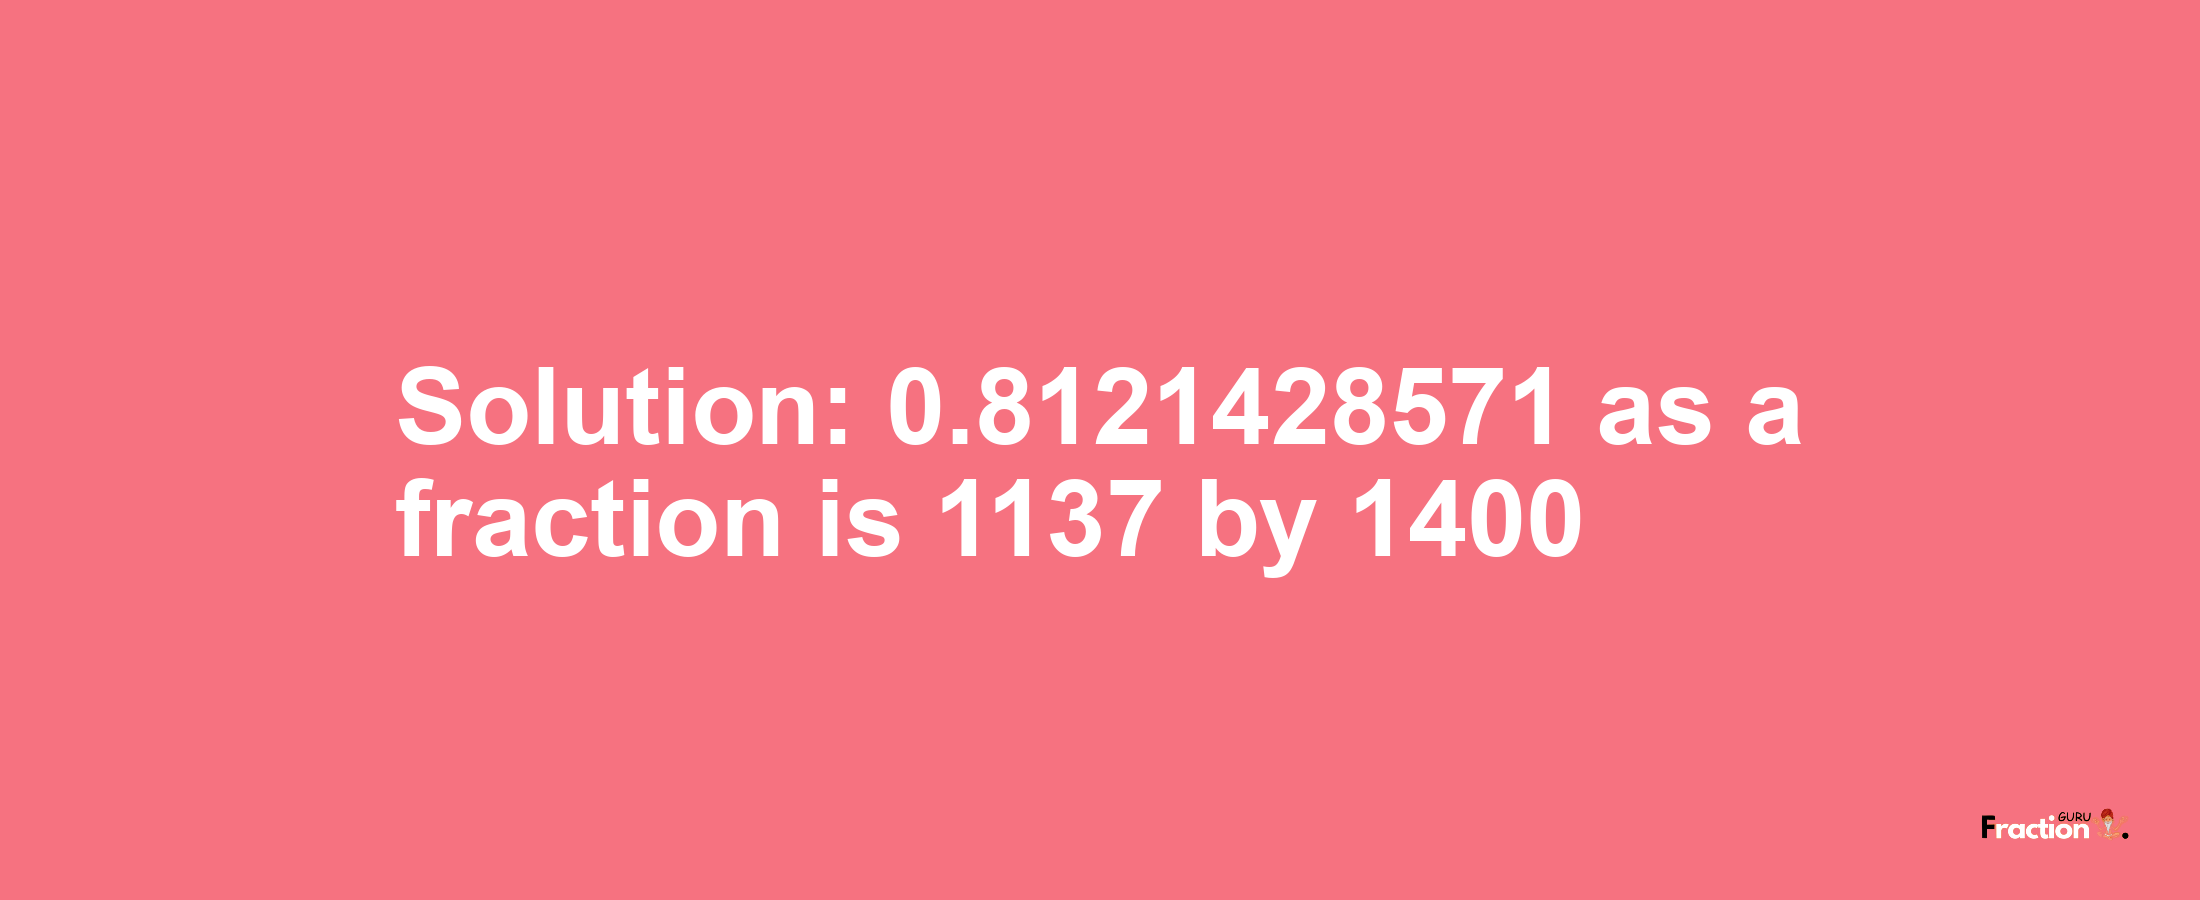 Solution:0.8121428571 as a fraction is 1137/1400